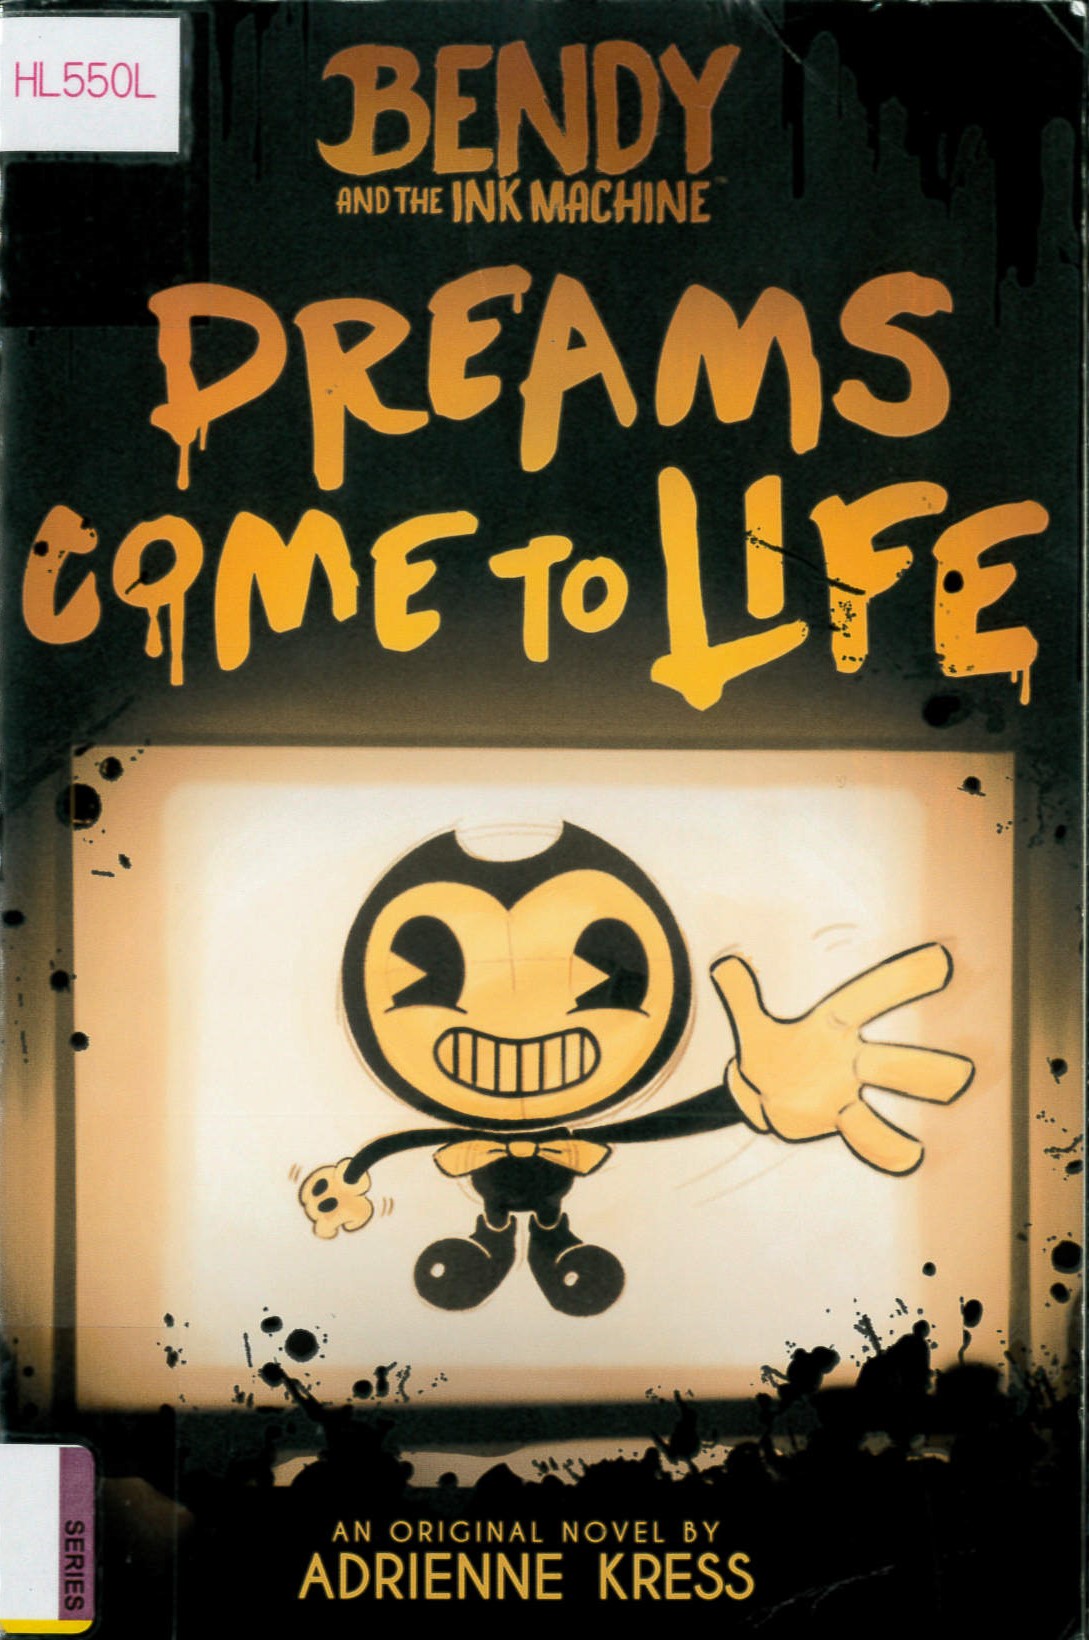 Bendy and the ink machine(1) : Dreams come to life /